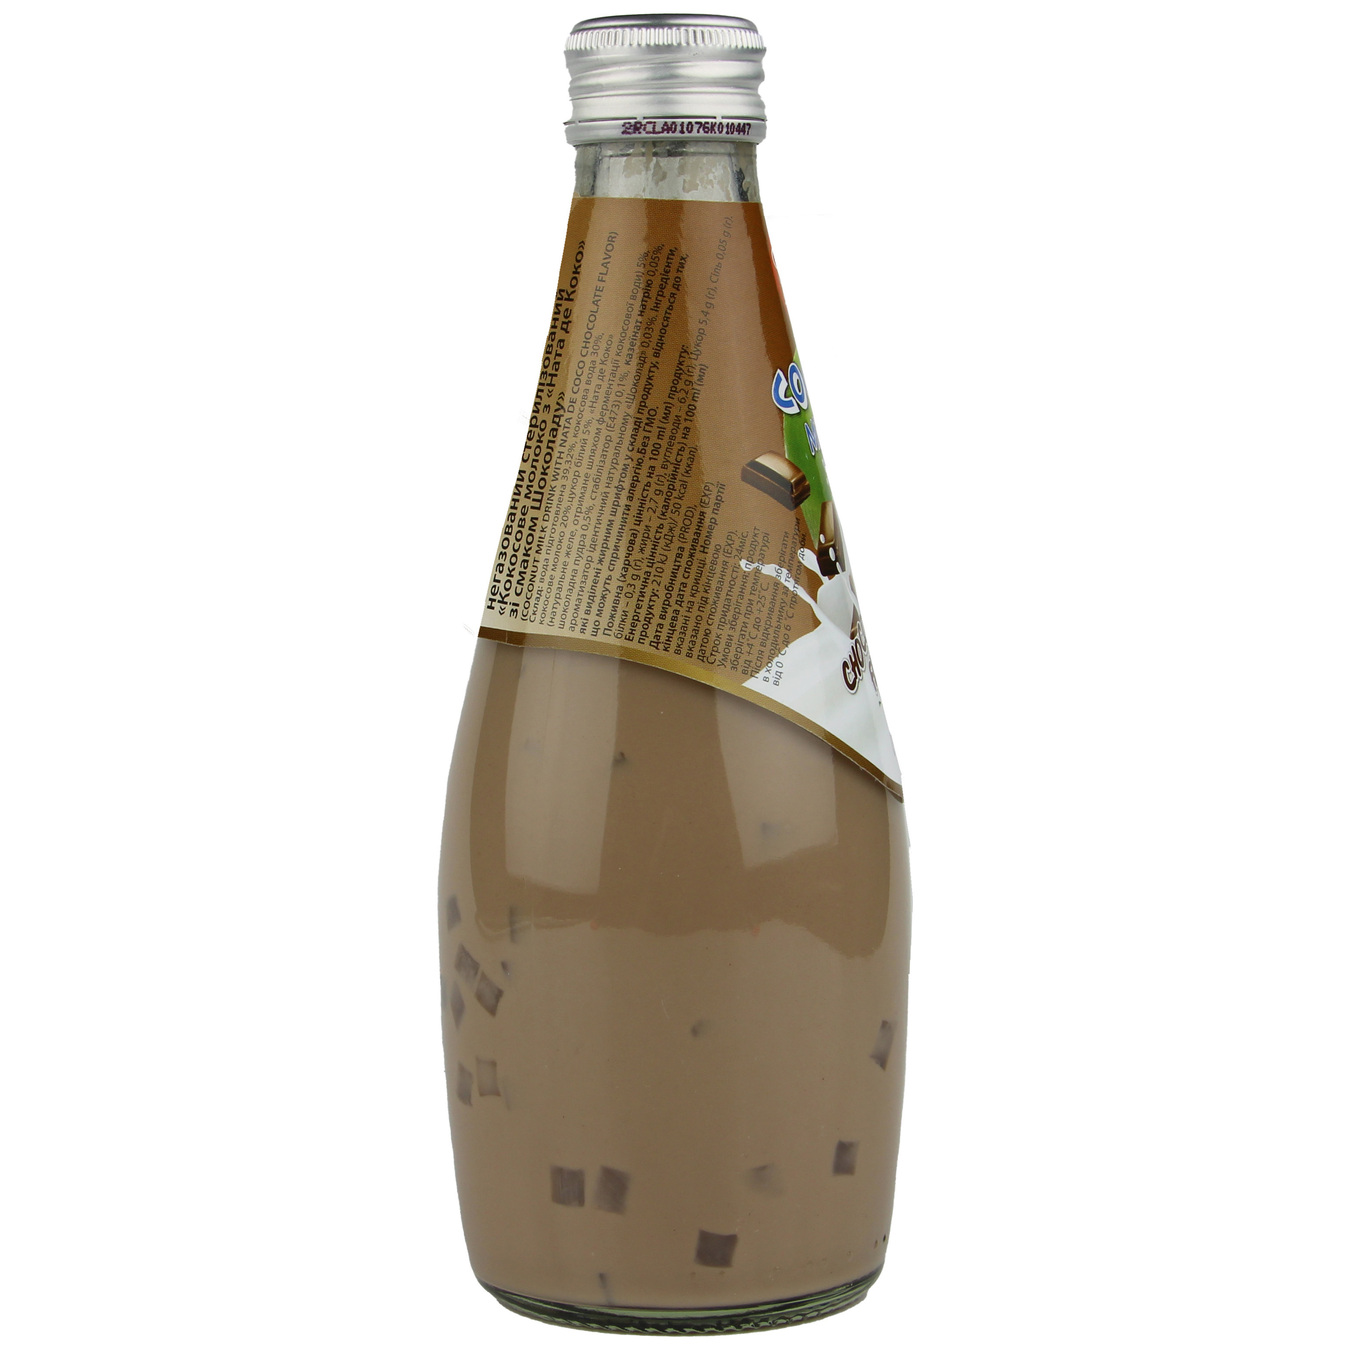 Luck Siam with chocolate flavored coconut milk drink 290ml 2